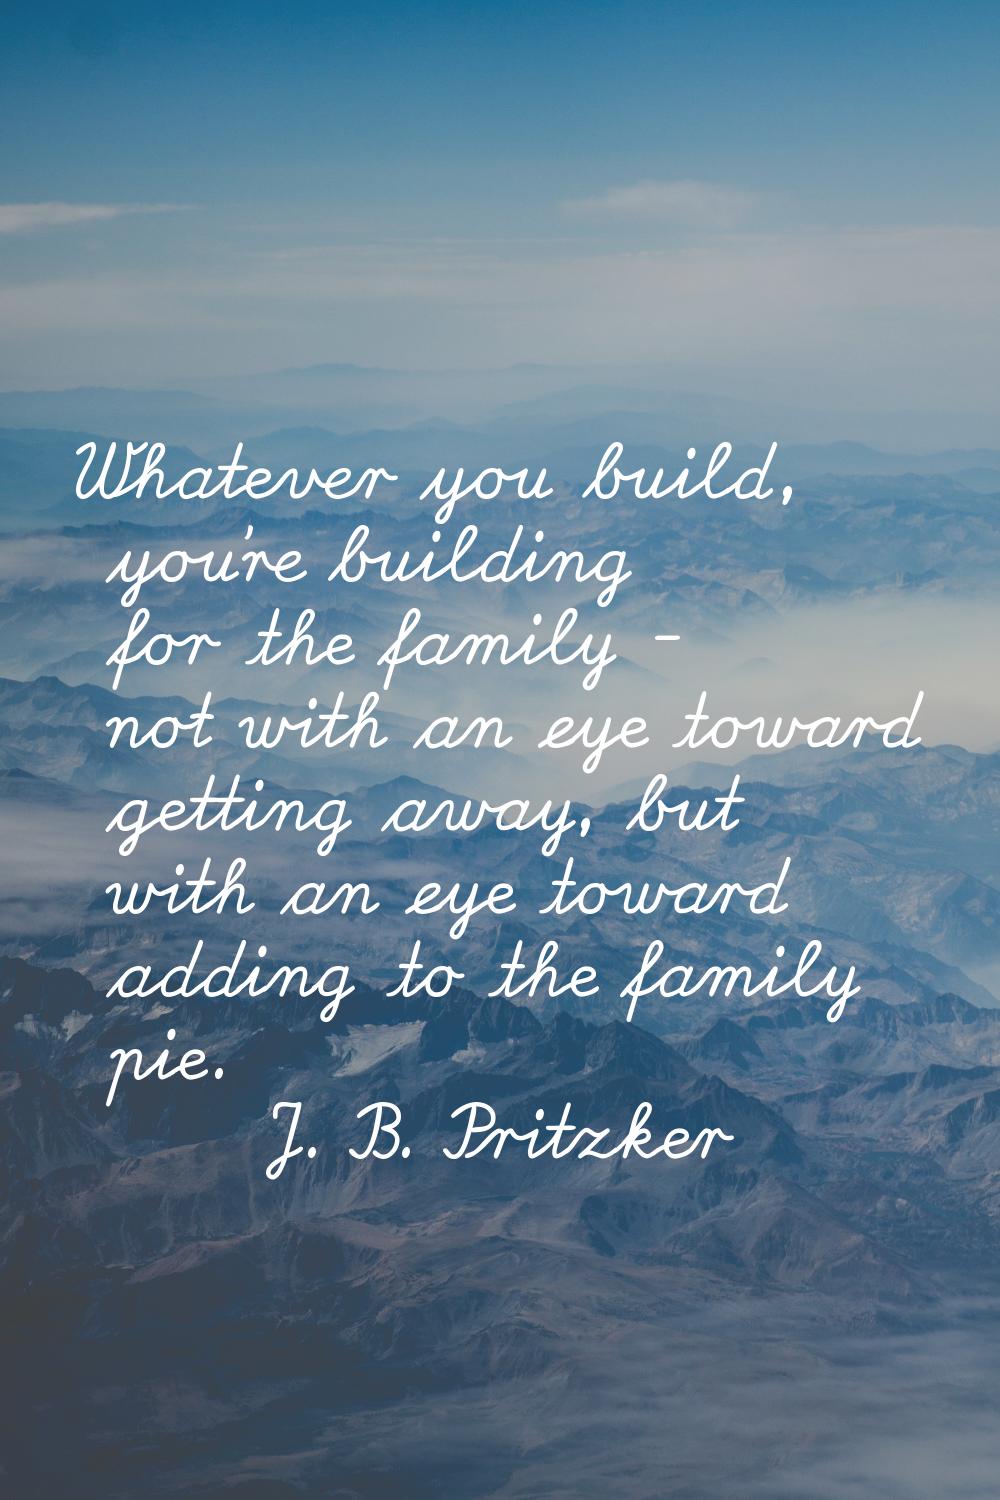 Whatever you build, you're building for the family - not with an eye toward getting away, but with 